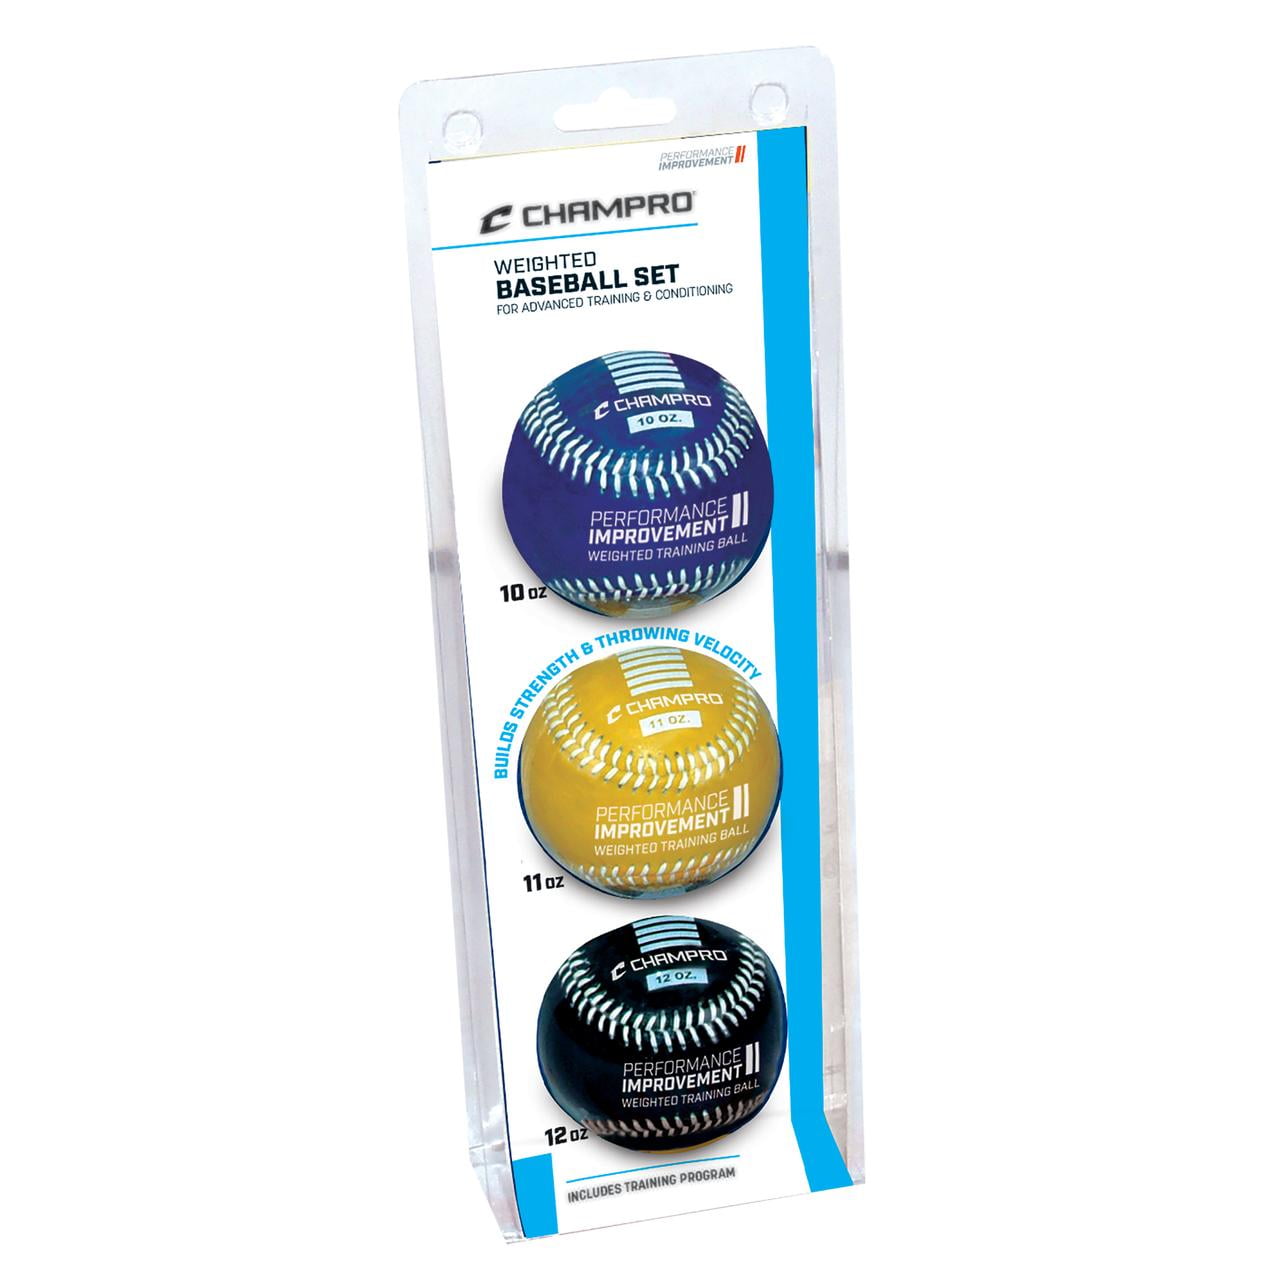 6 Pack Champro Weighted Training Ball Set